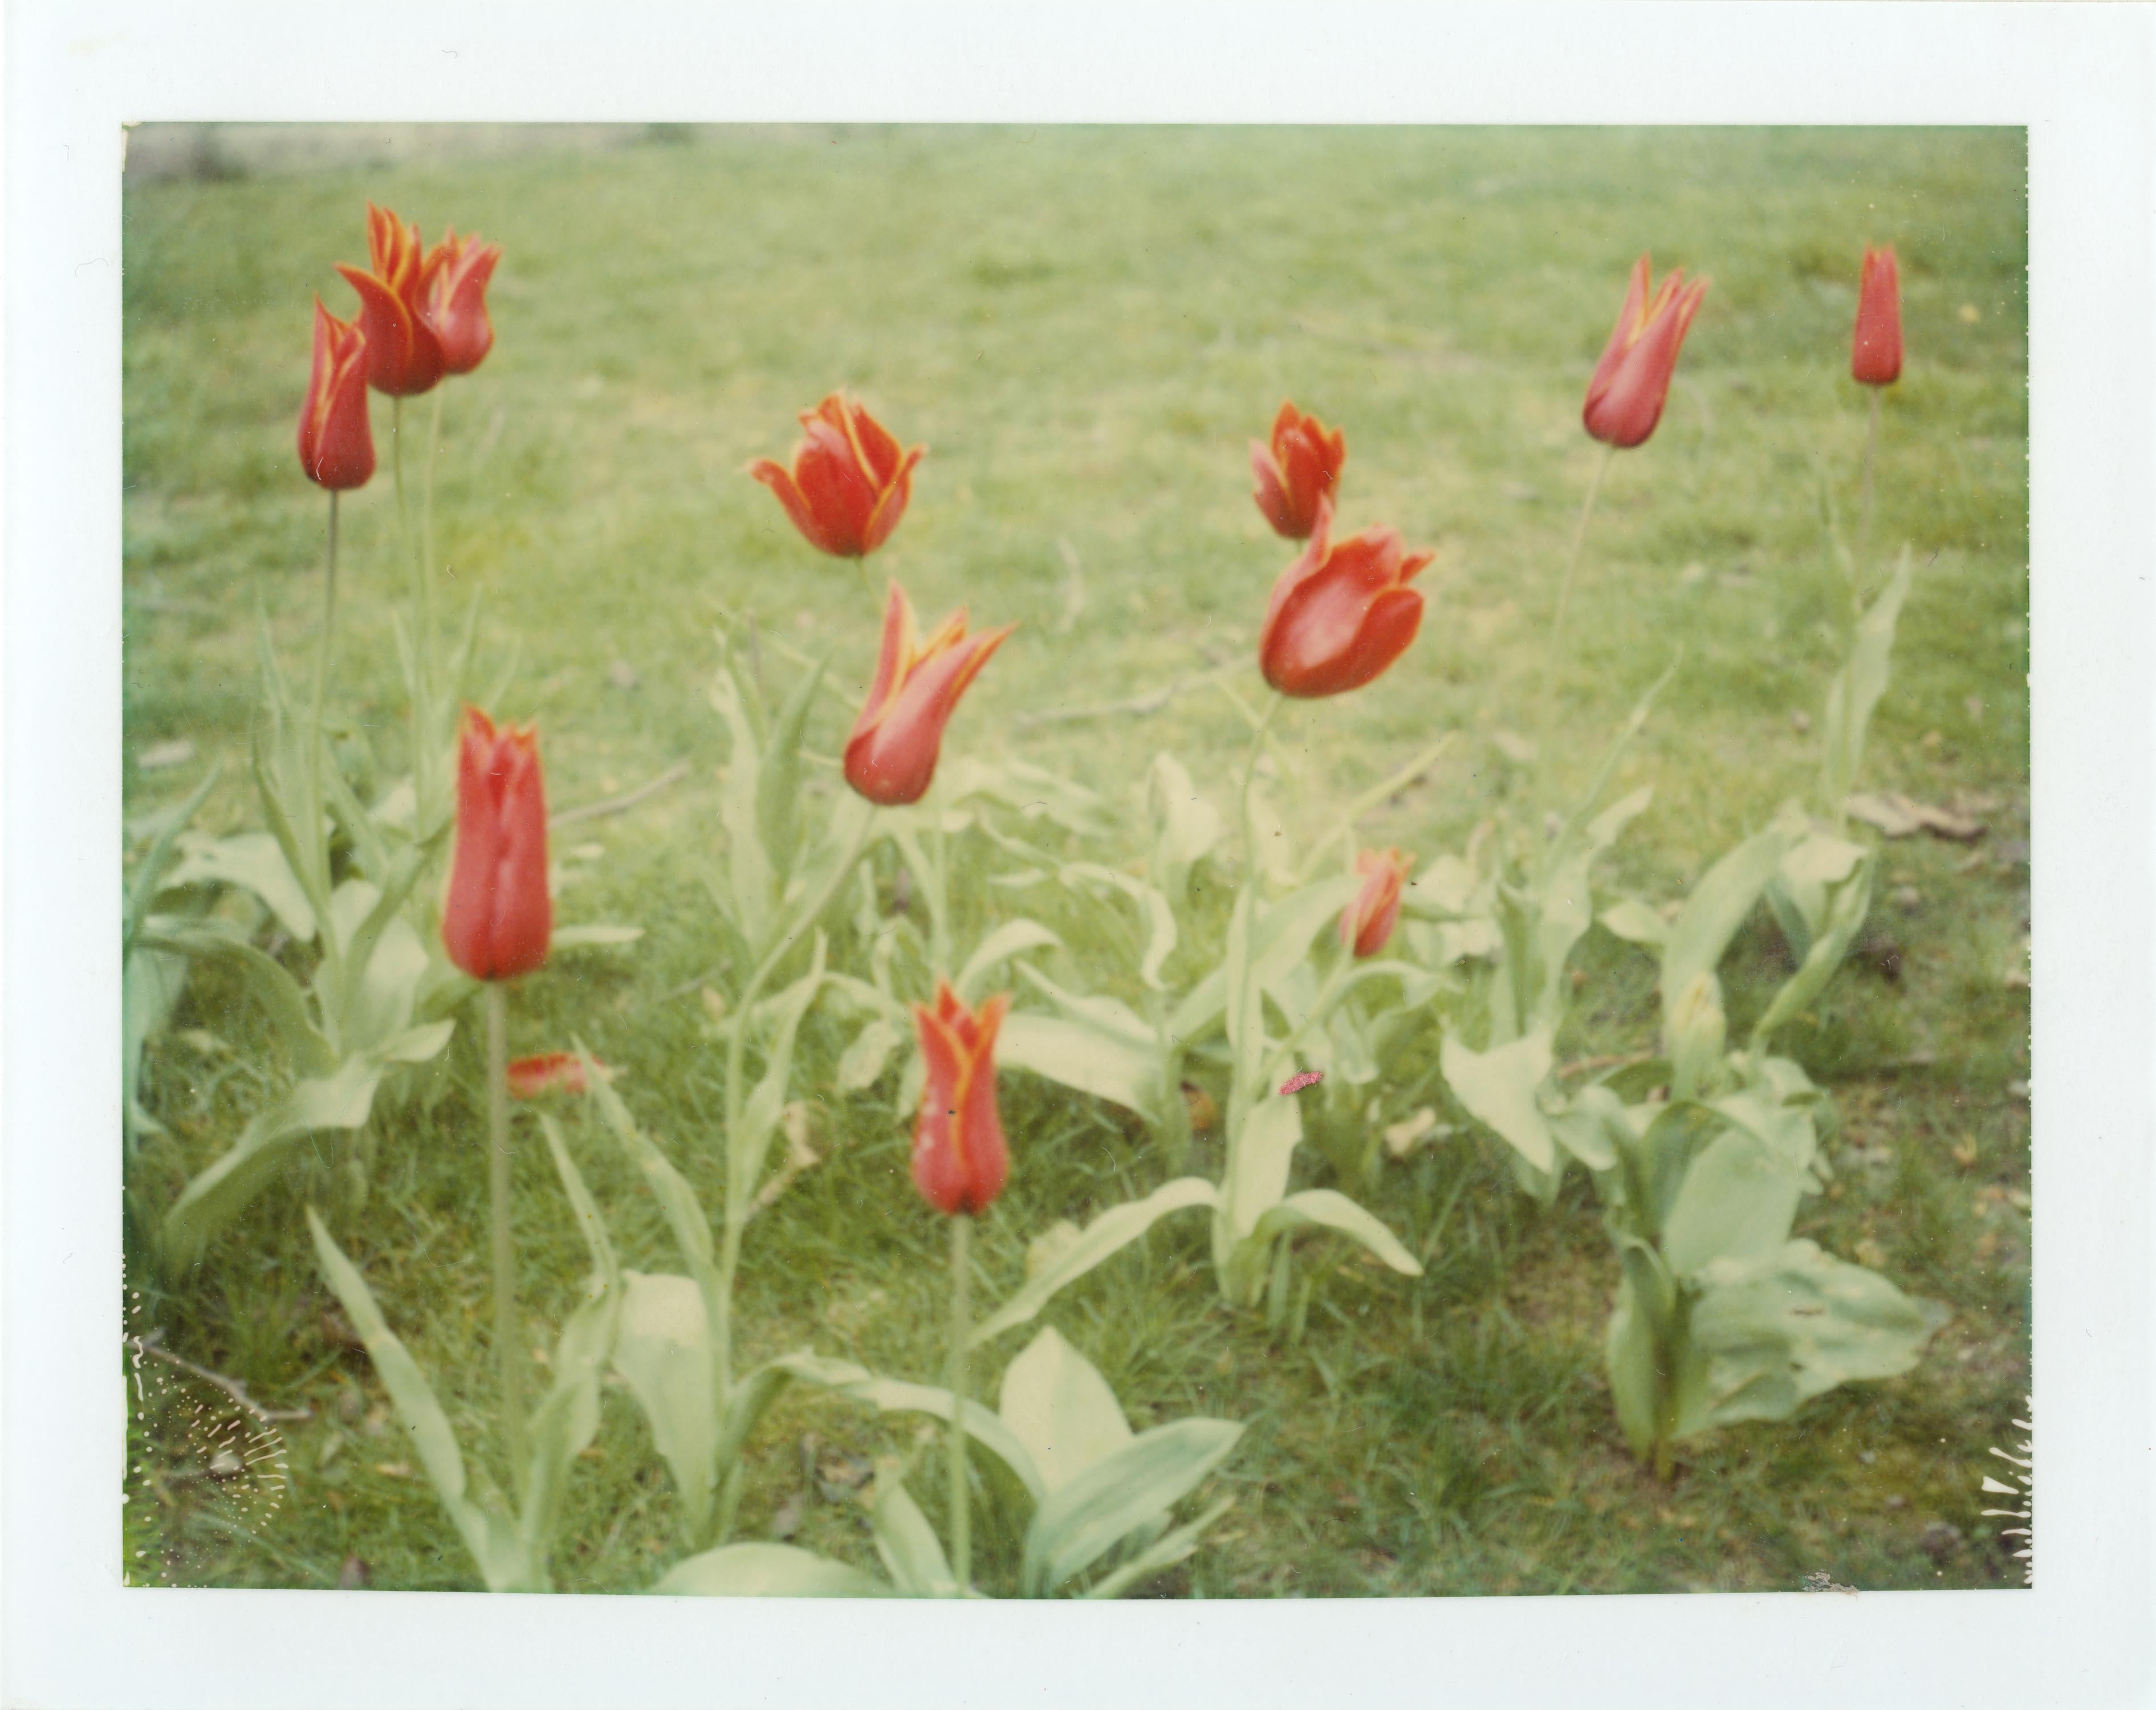 Springtime (Paris) - 1995 / quadriptych - 

4 pieces, 110x130cm installed. 
Edition of 5, each 50x60cm including white borders. 
4 analog C-Prints, hand-printed by the artist and based on 4 Polaroids.  
Signature label and Certificate. 
Artist